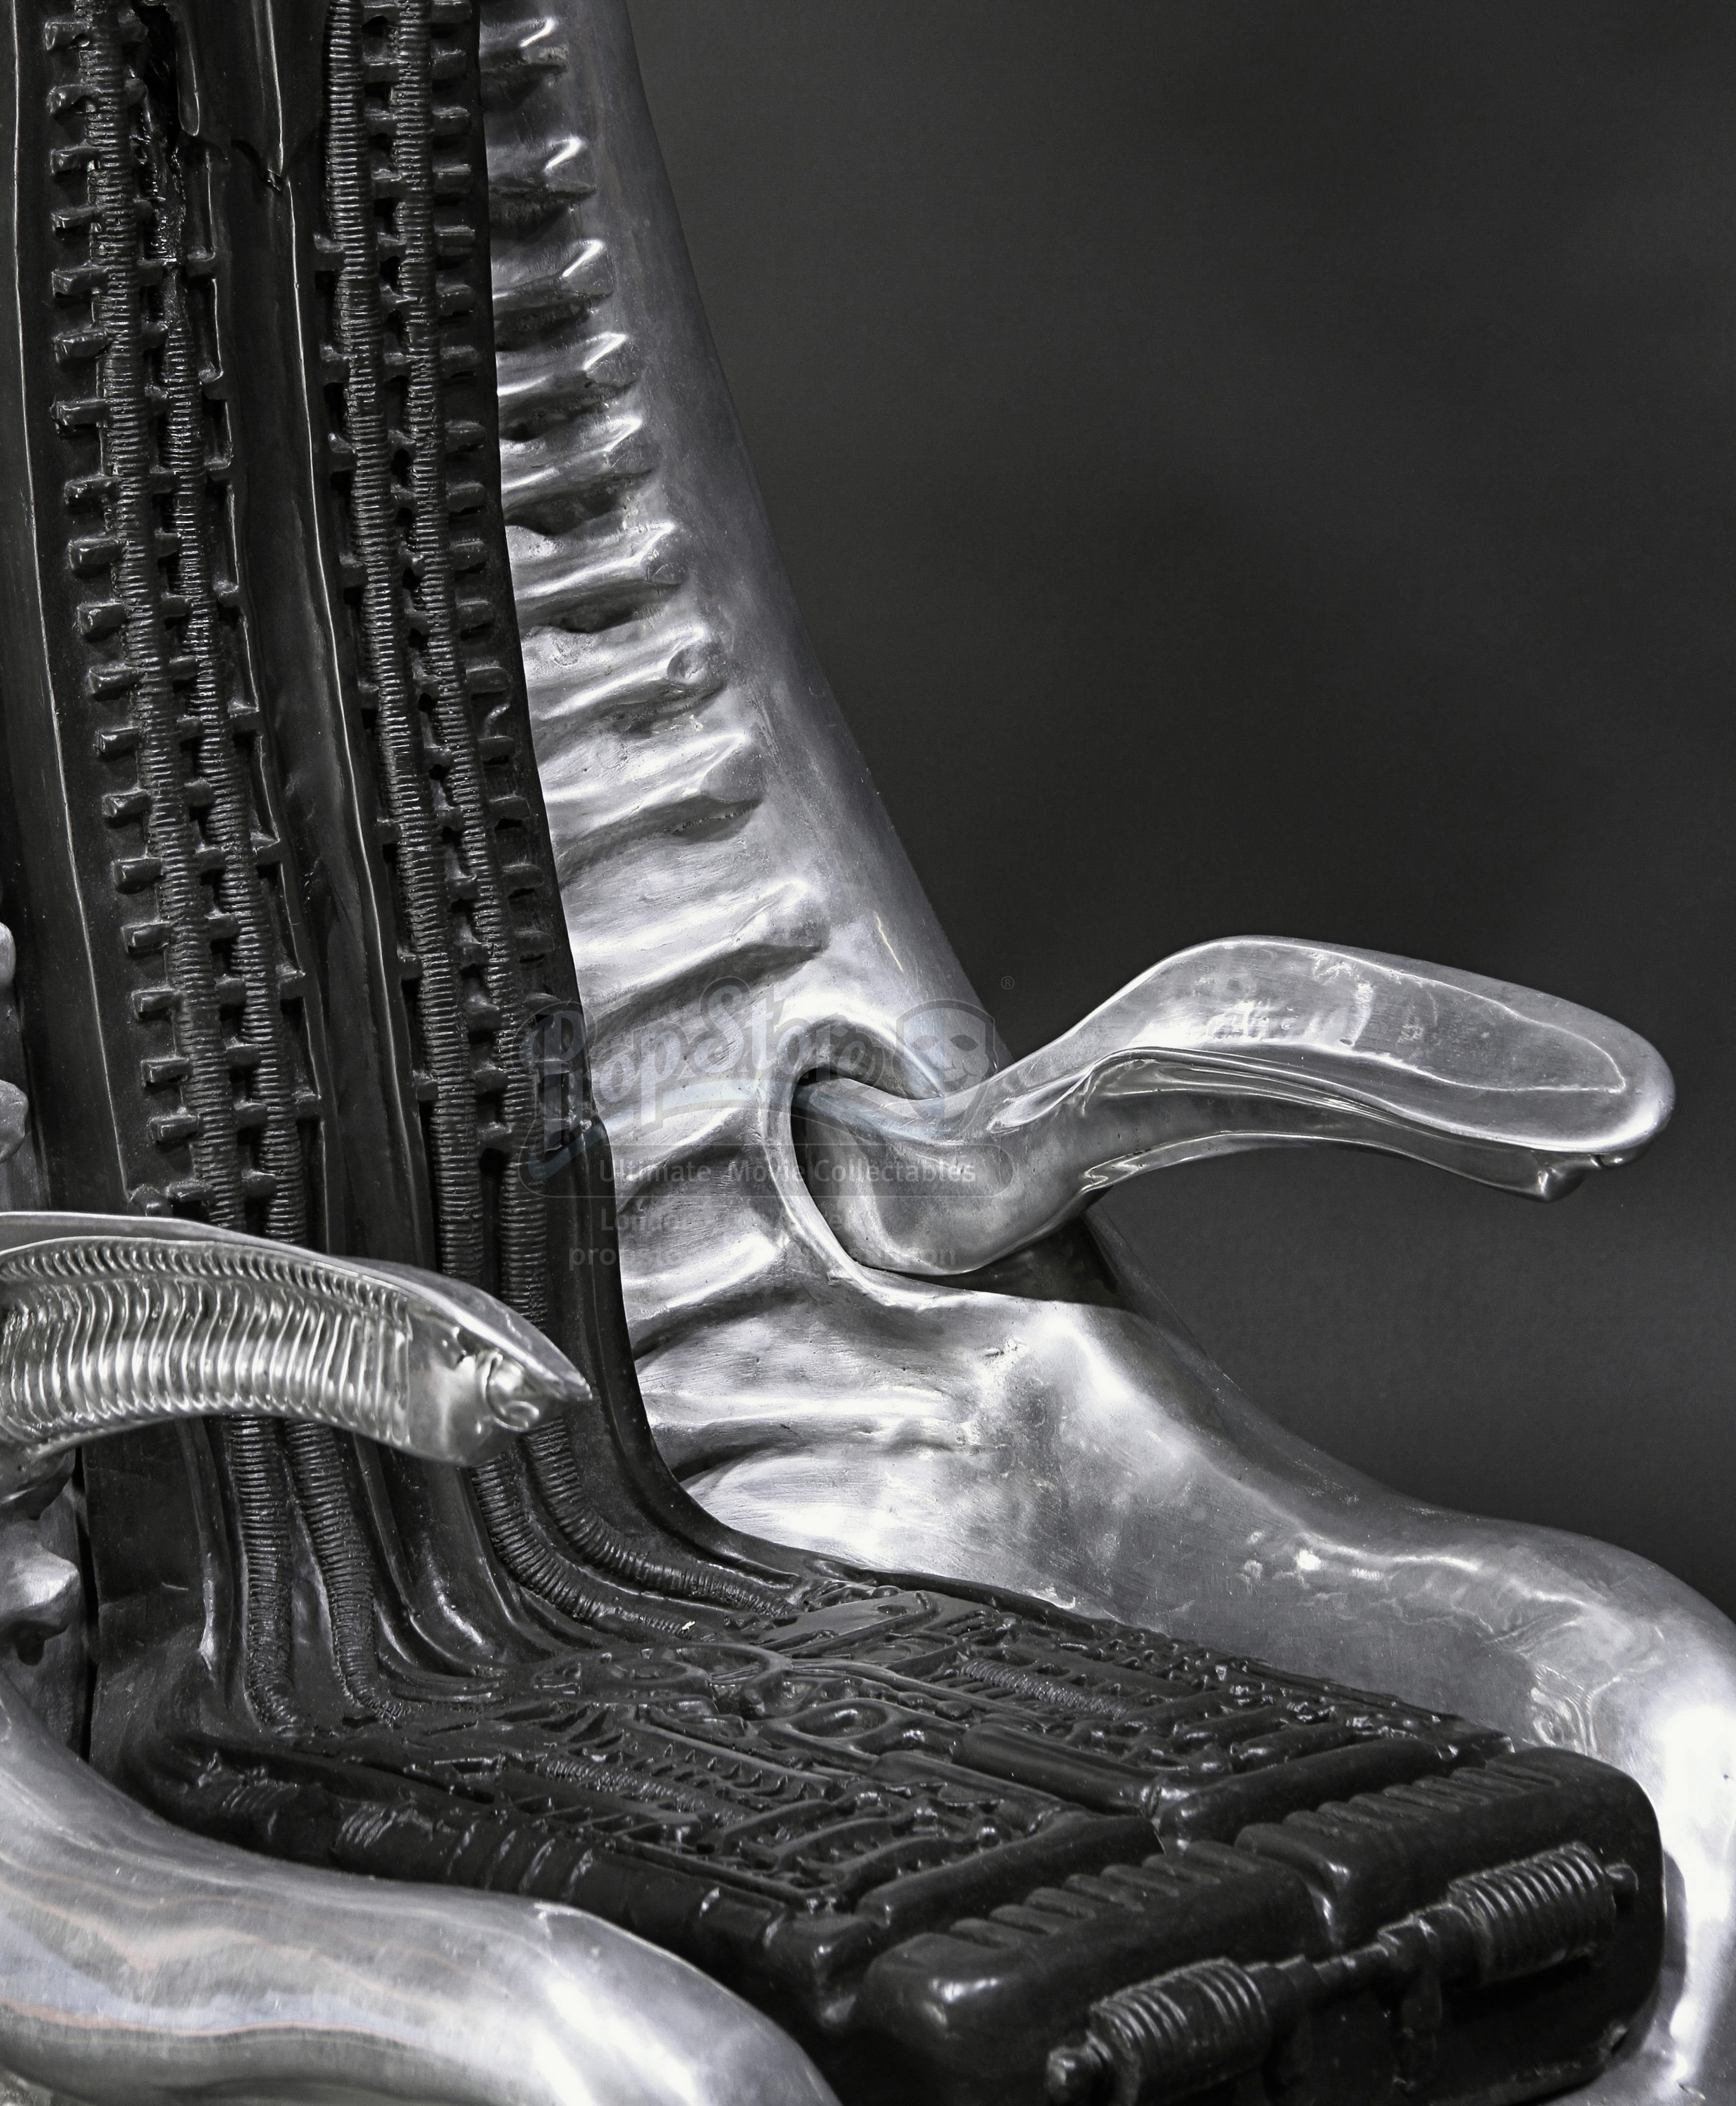 Giger-Owned Aluminium Harkonnen "Capo" Chair H.R. GIGER. 